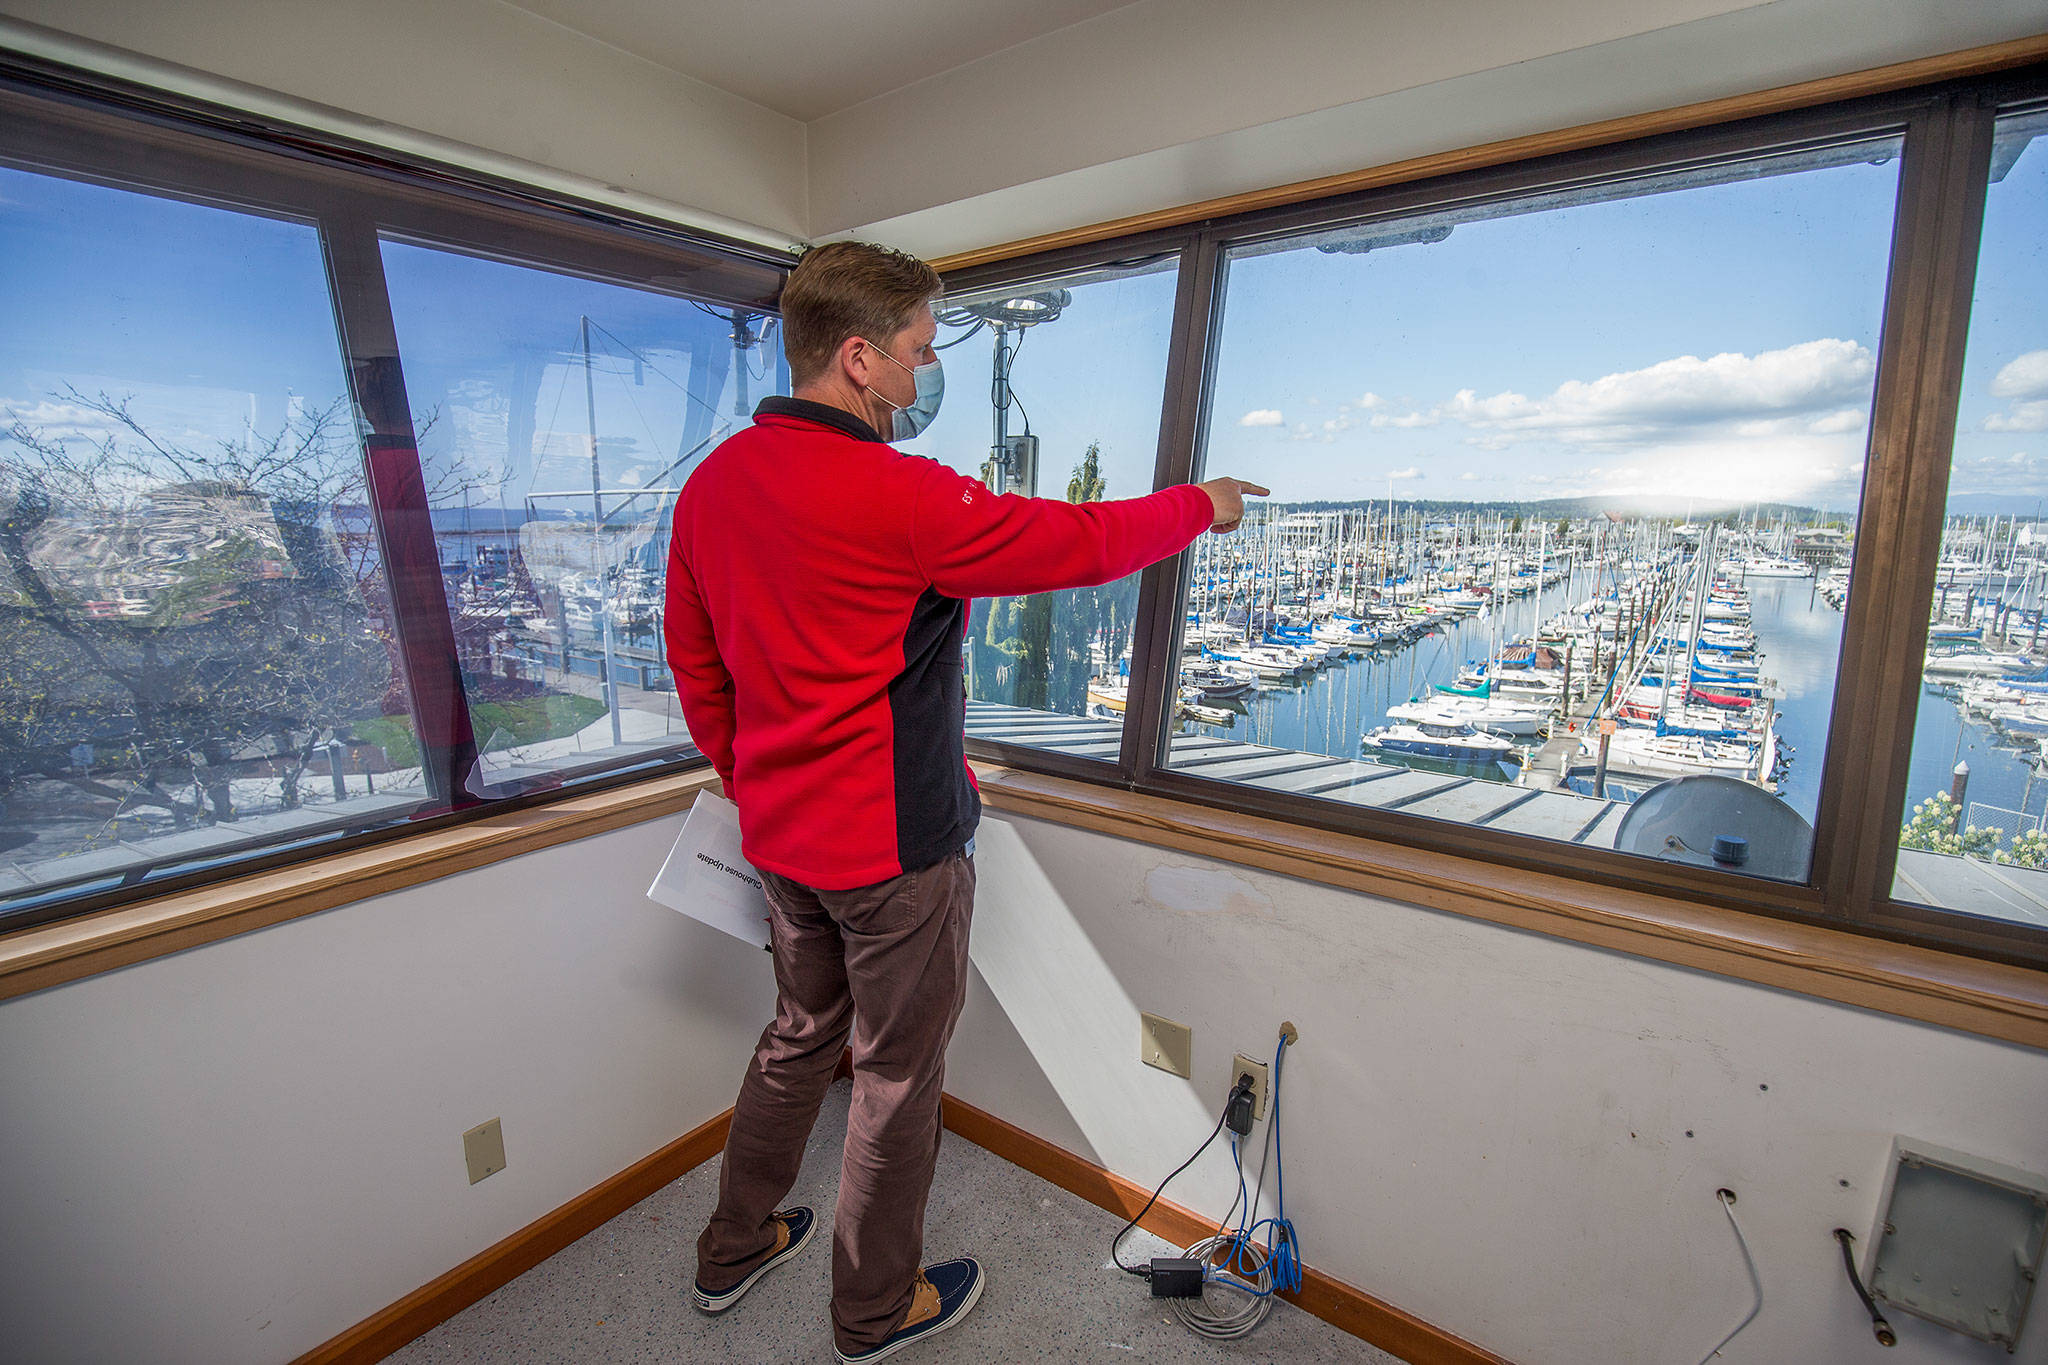 From the third floor crow’s nest of its new building in the Port of Everett’s South Marina, Everett Yacht Club Commodore John Seger points out what will be the club’s dock, Tuesday in Everett. (Andy Bronson / The Herald)